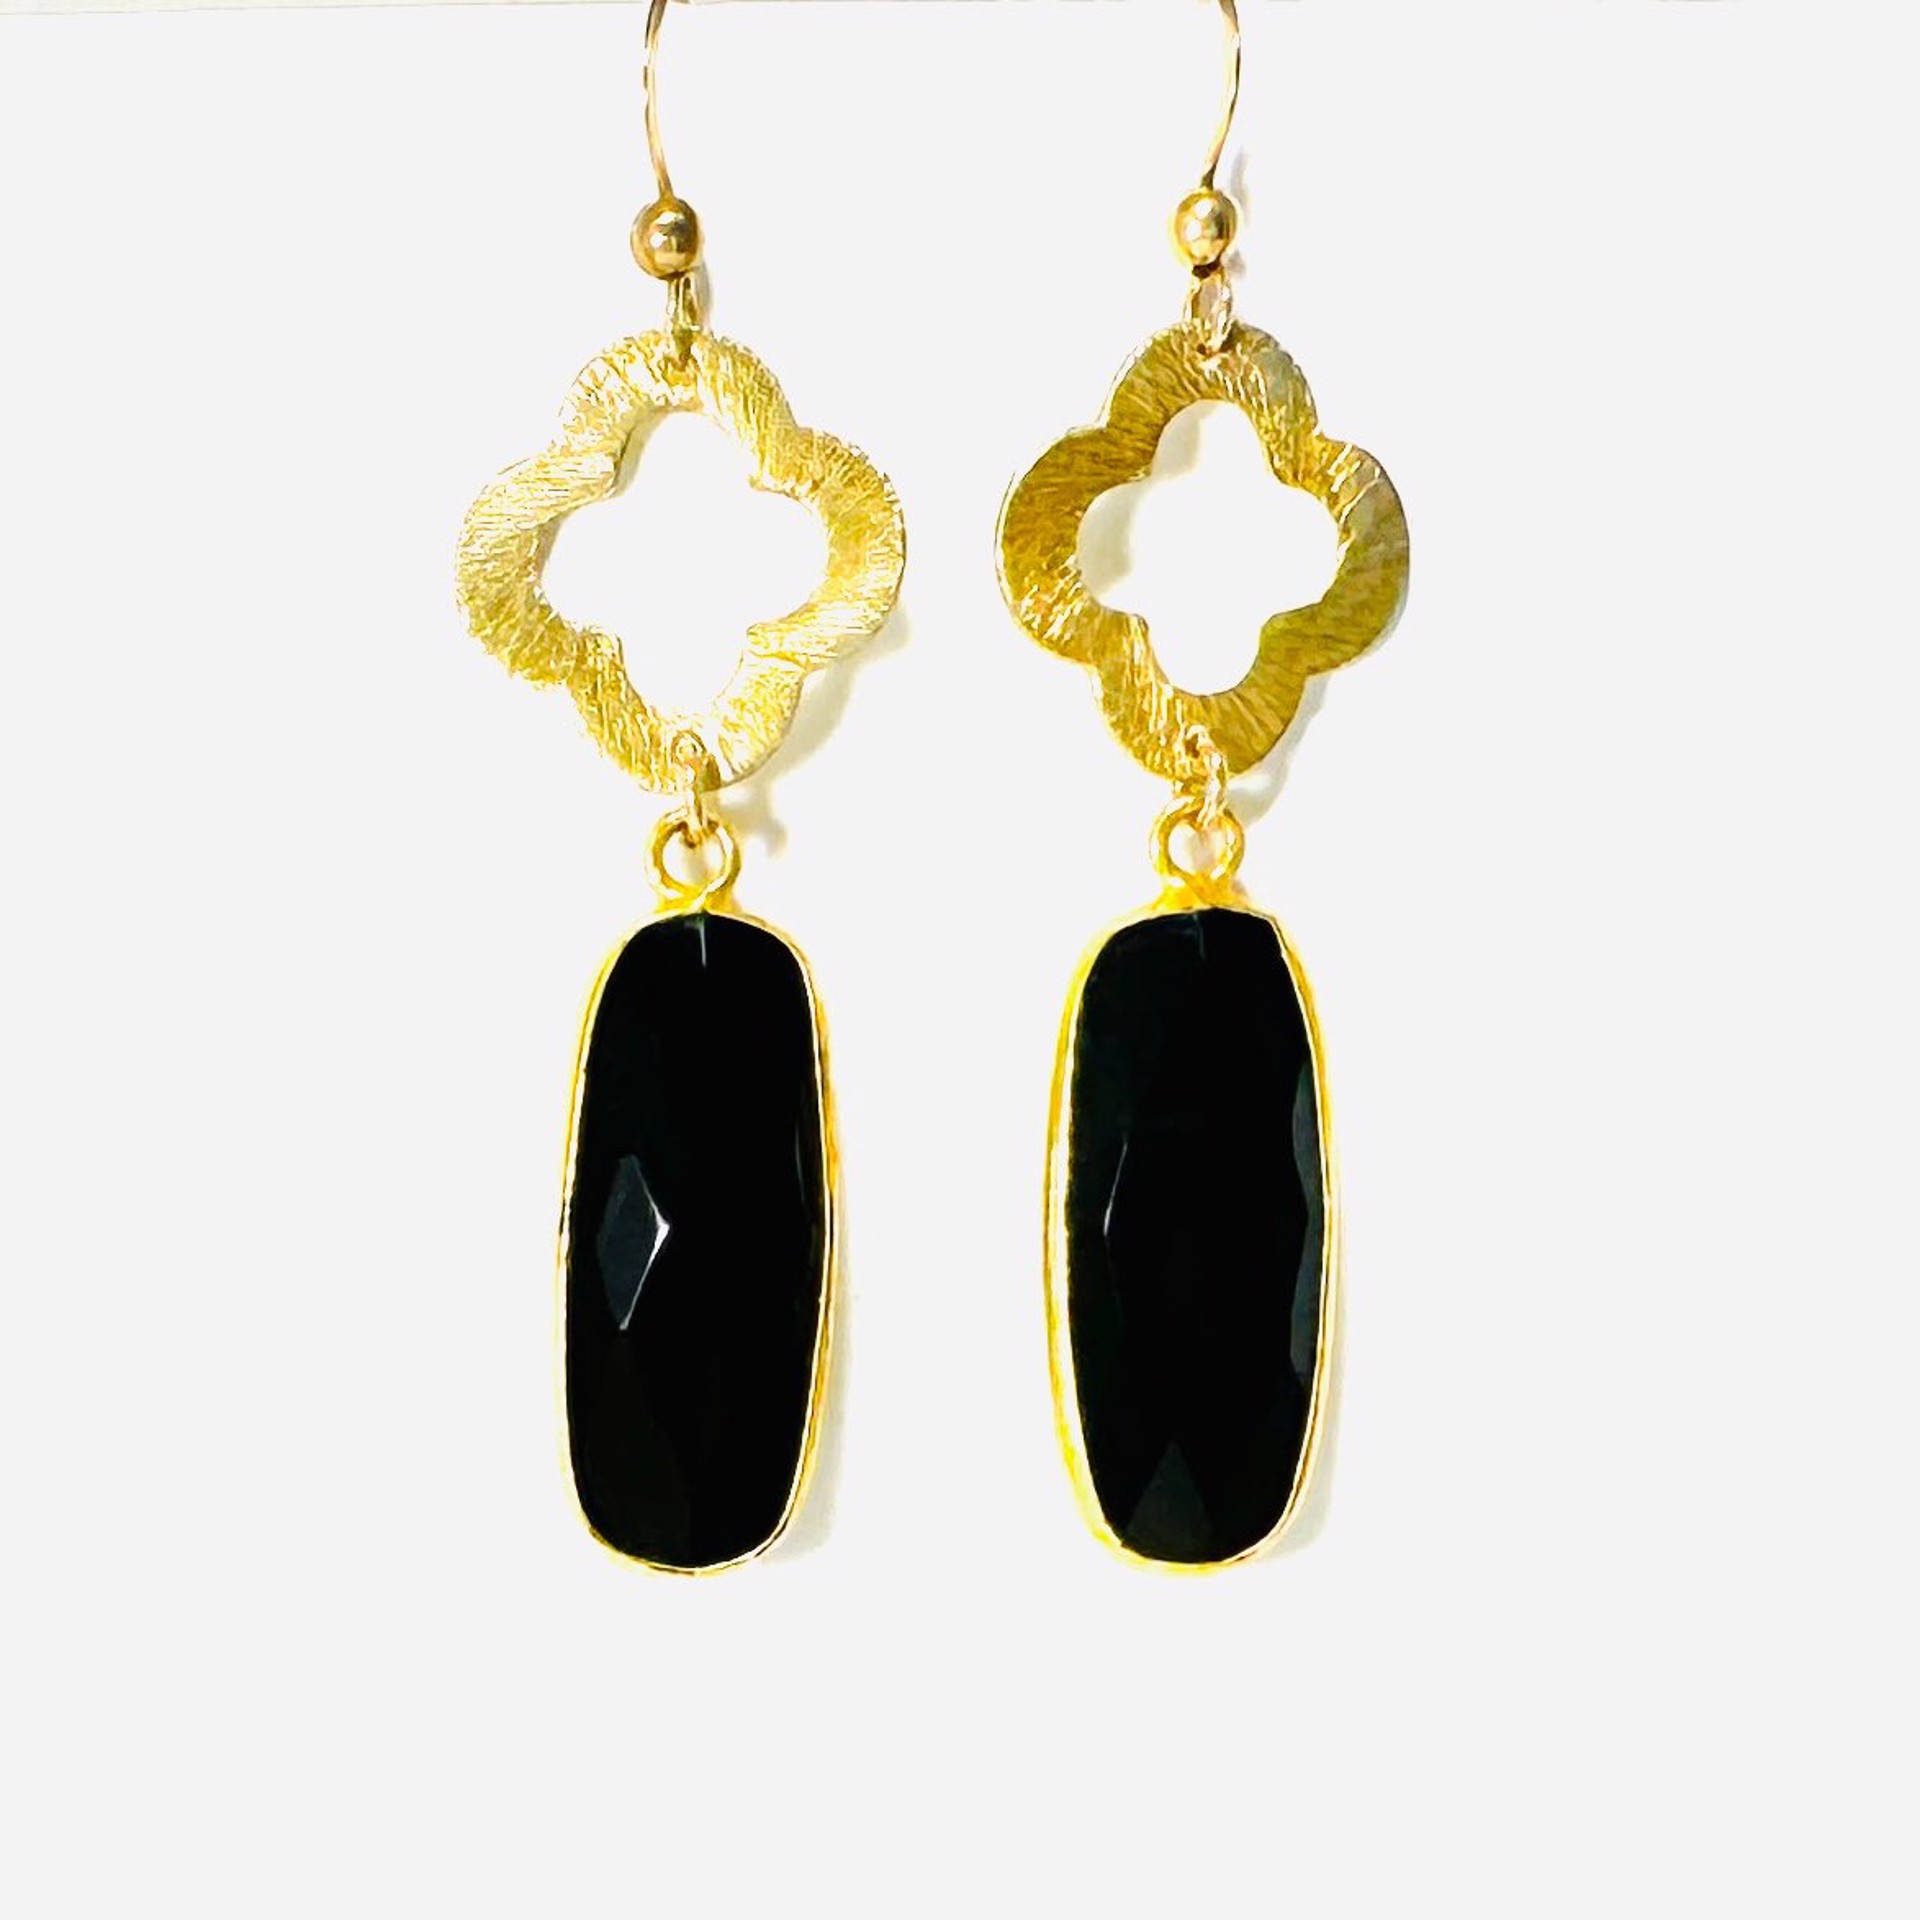 Vermeil Wrapped Faceted Onyx Rectangle Bead, 14k gp Clover Earrings LR24-15 by Legare Riano